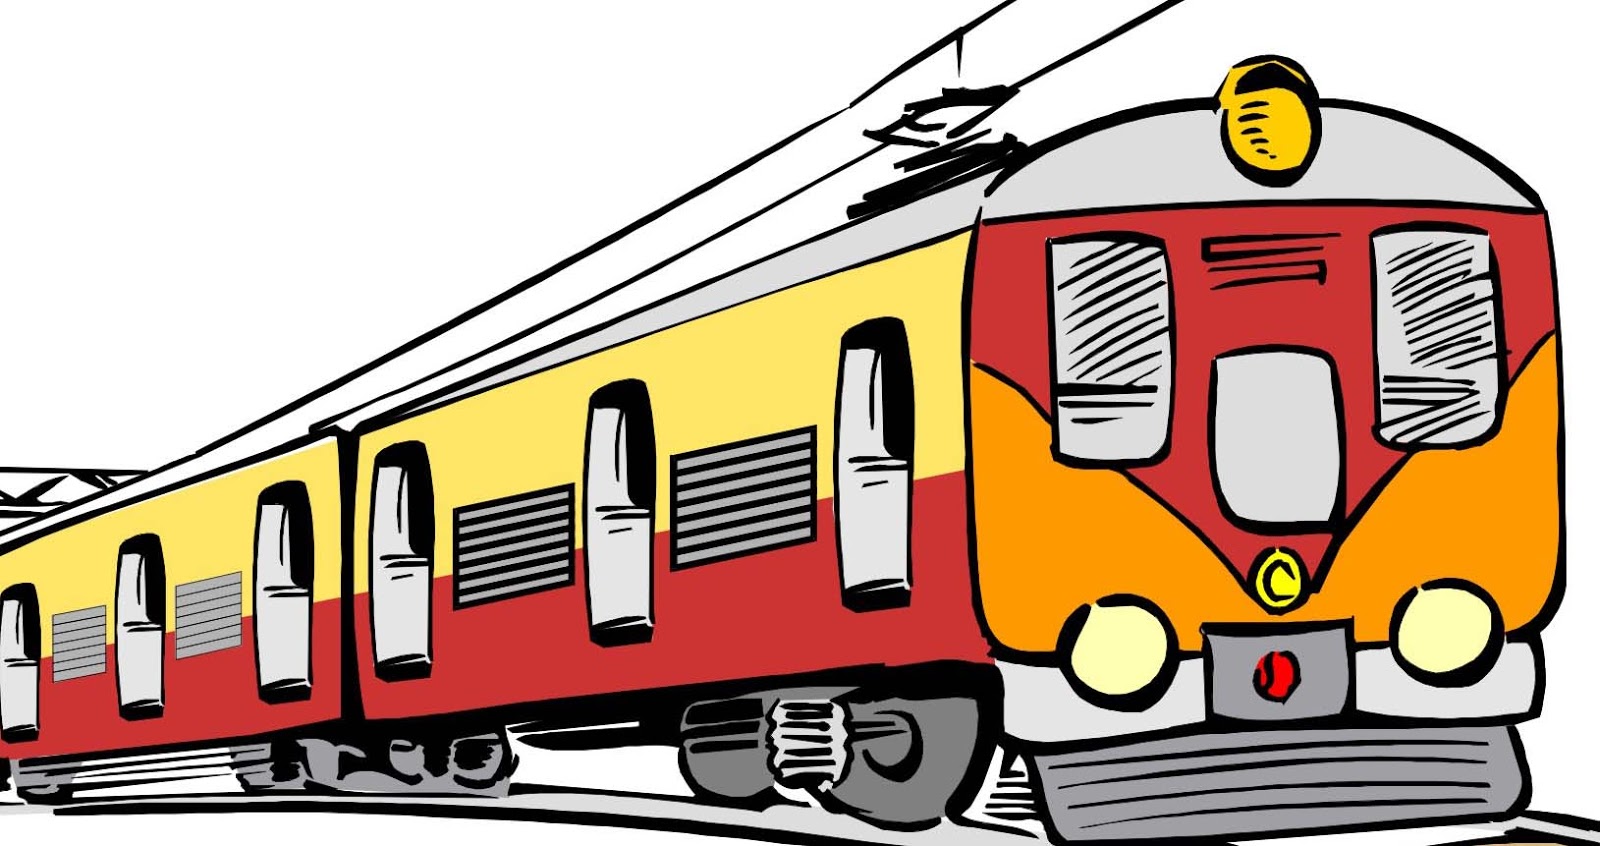 LIC PENSIONERS CHRONICLE: Spot your train with ease